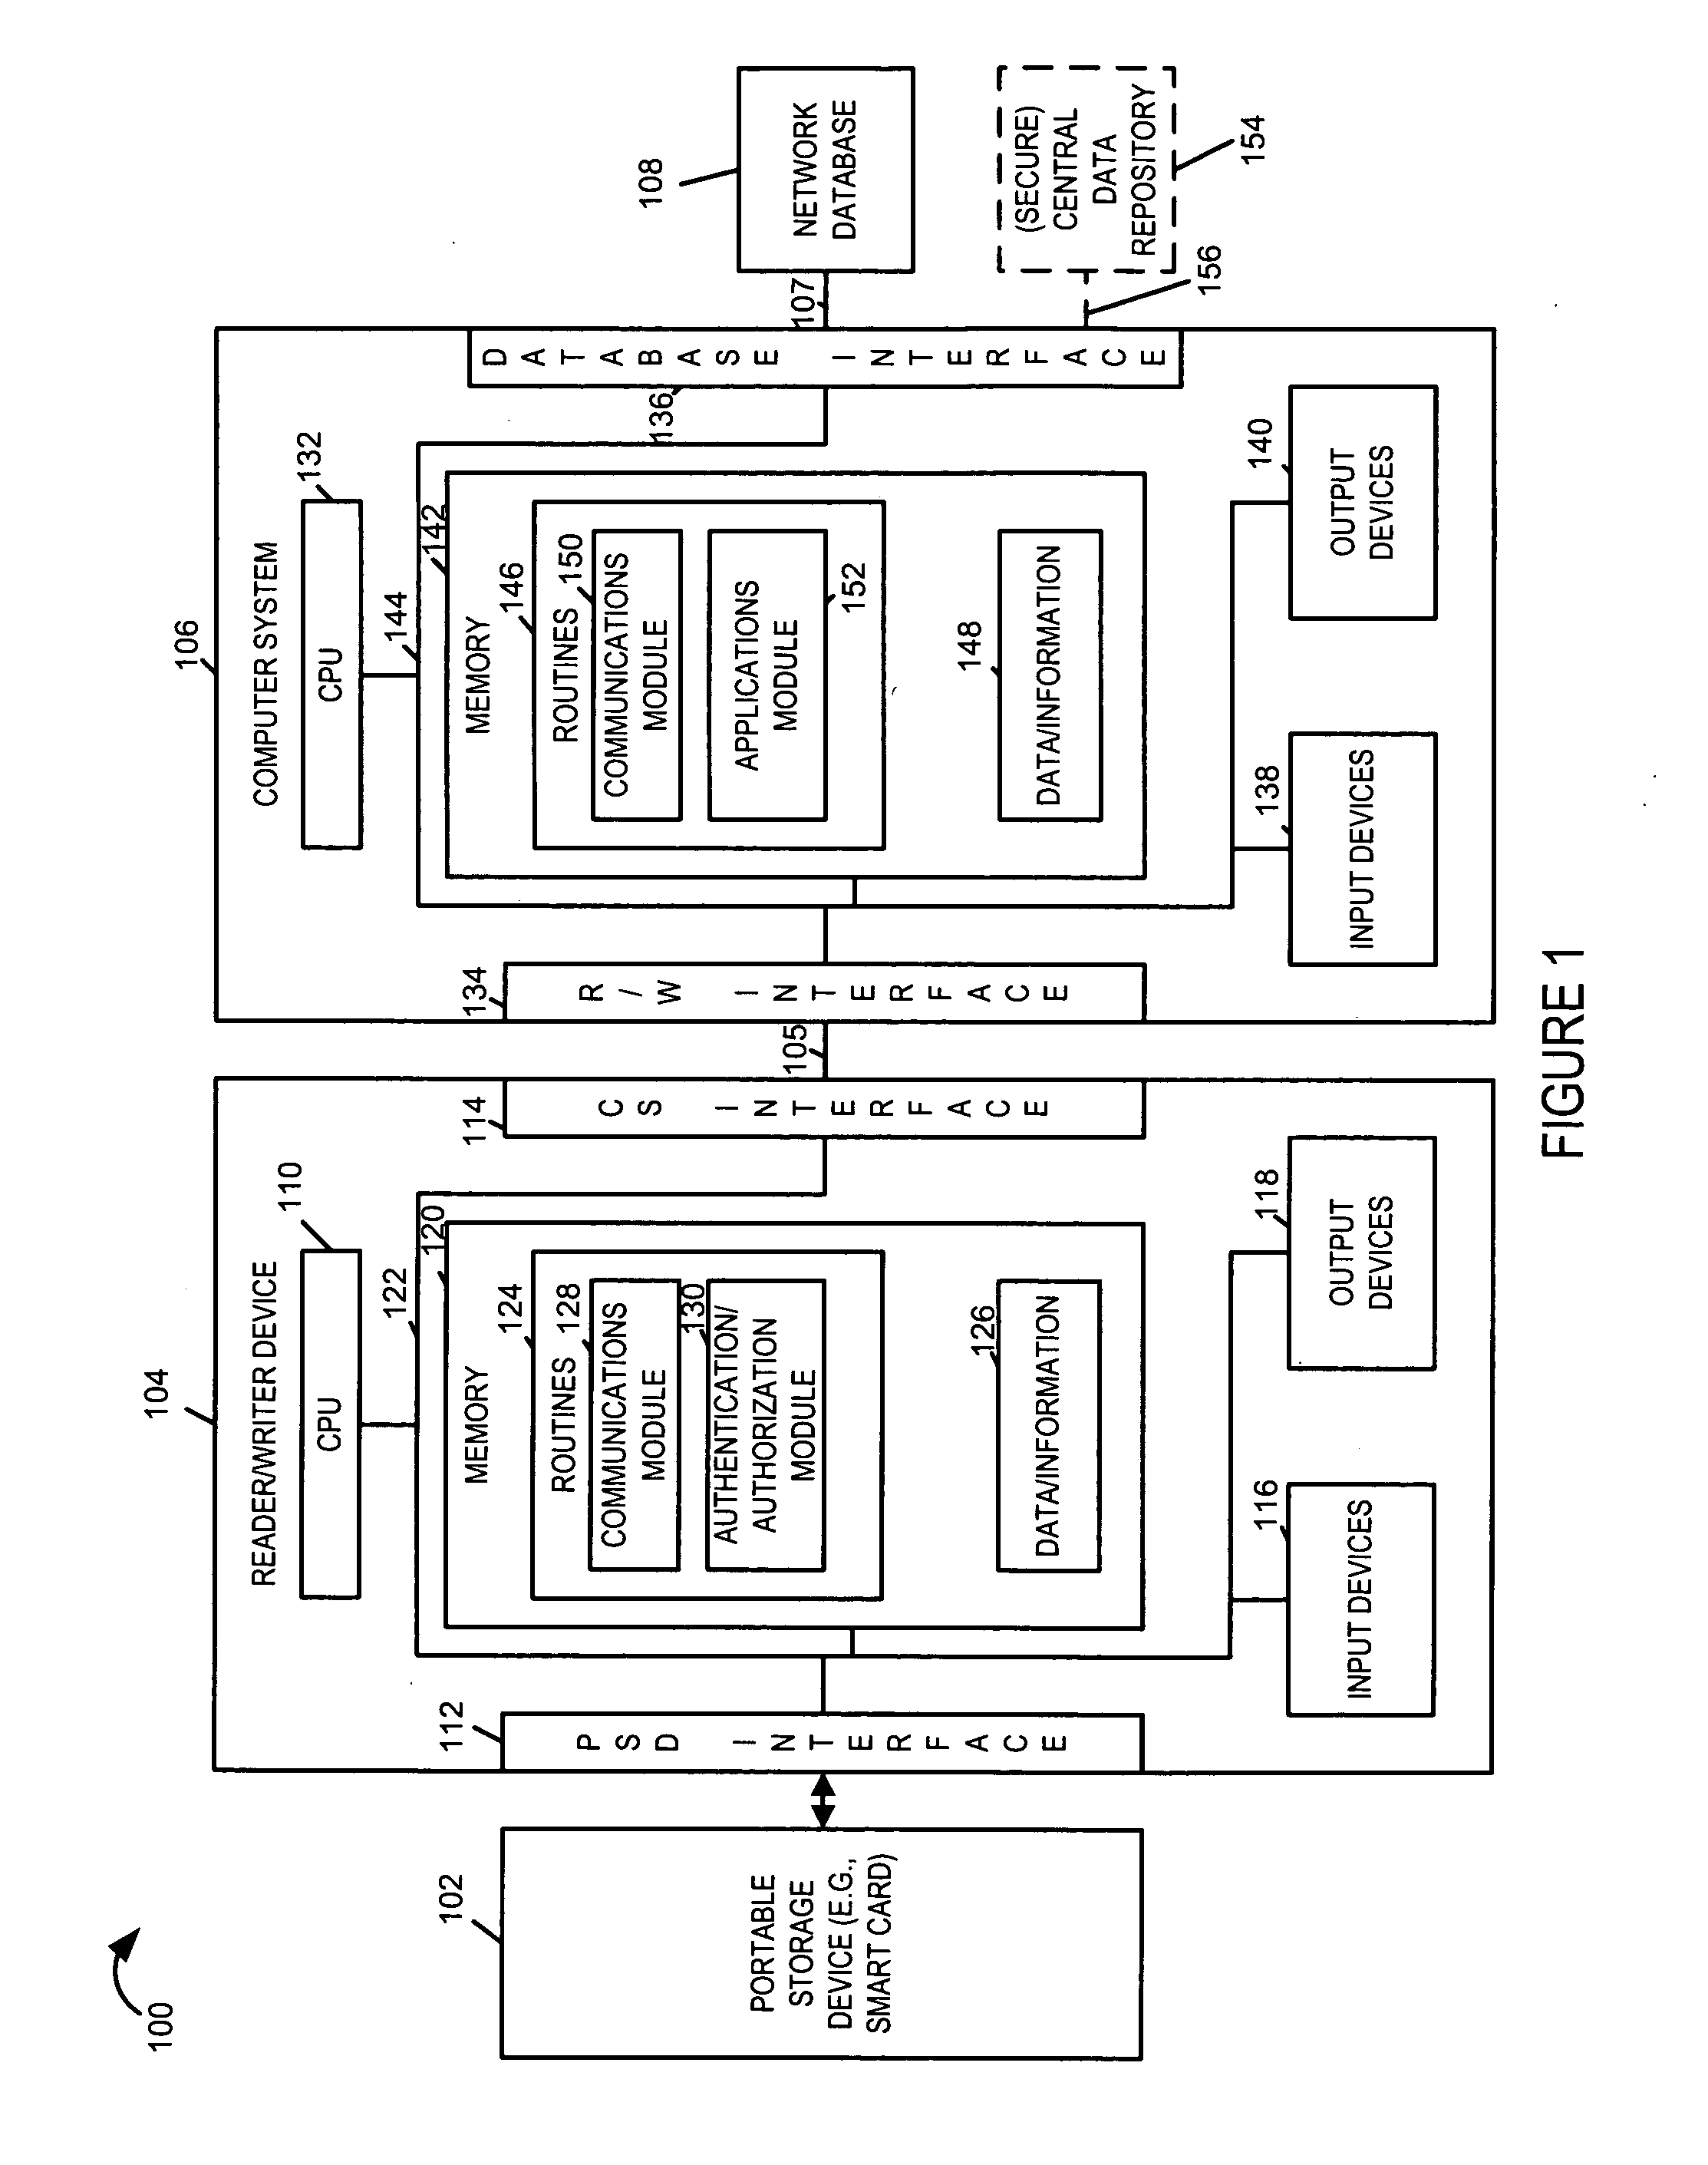 Portable electronic data storage and retreival system for group data